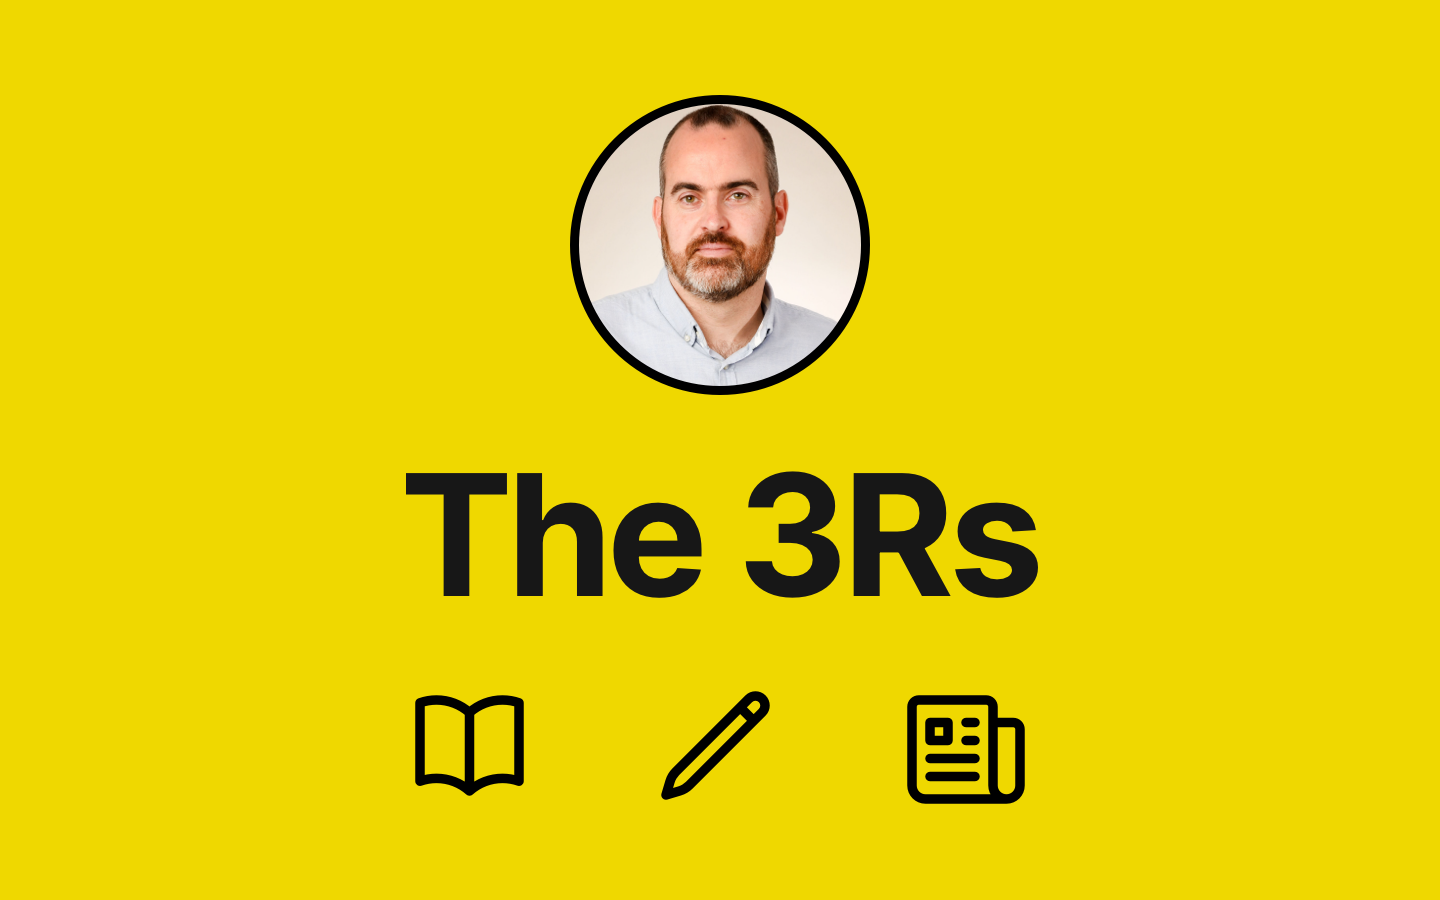 The 3Rs - Reading, writing, and research to be interested in #41 Post feature image